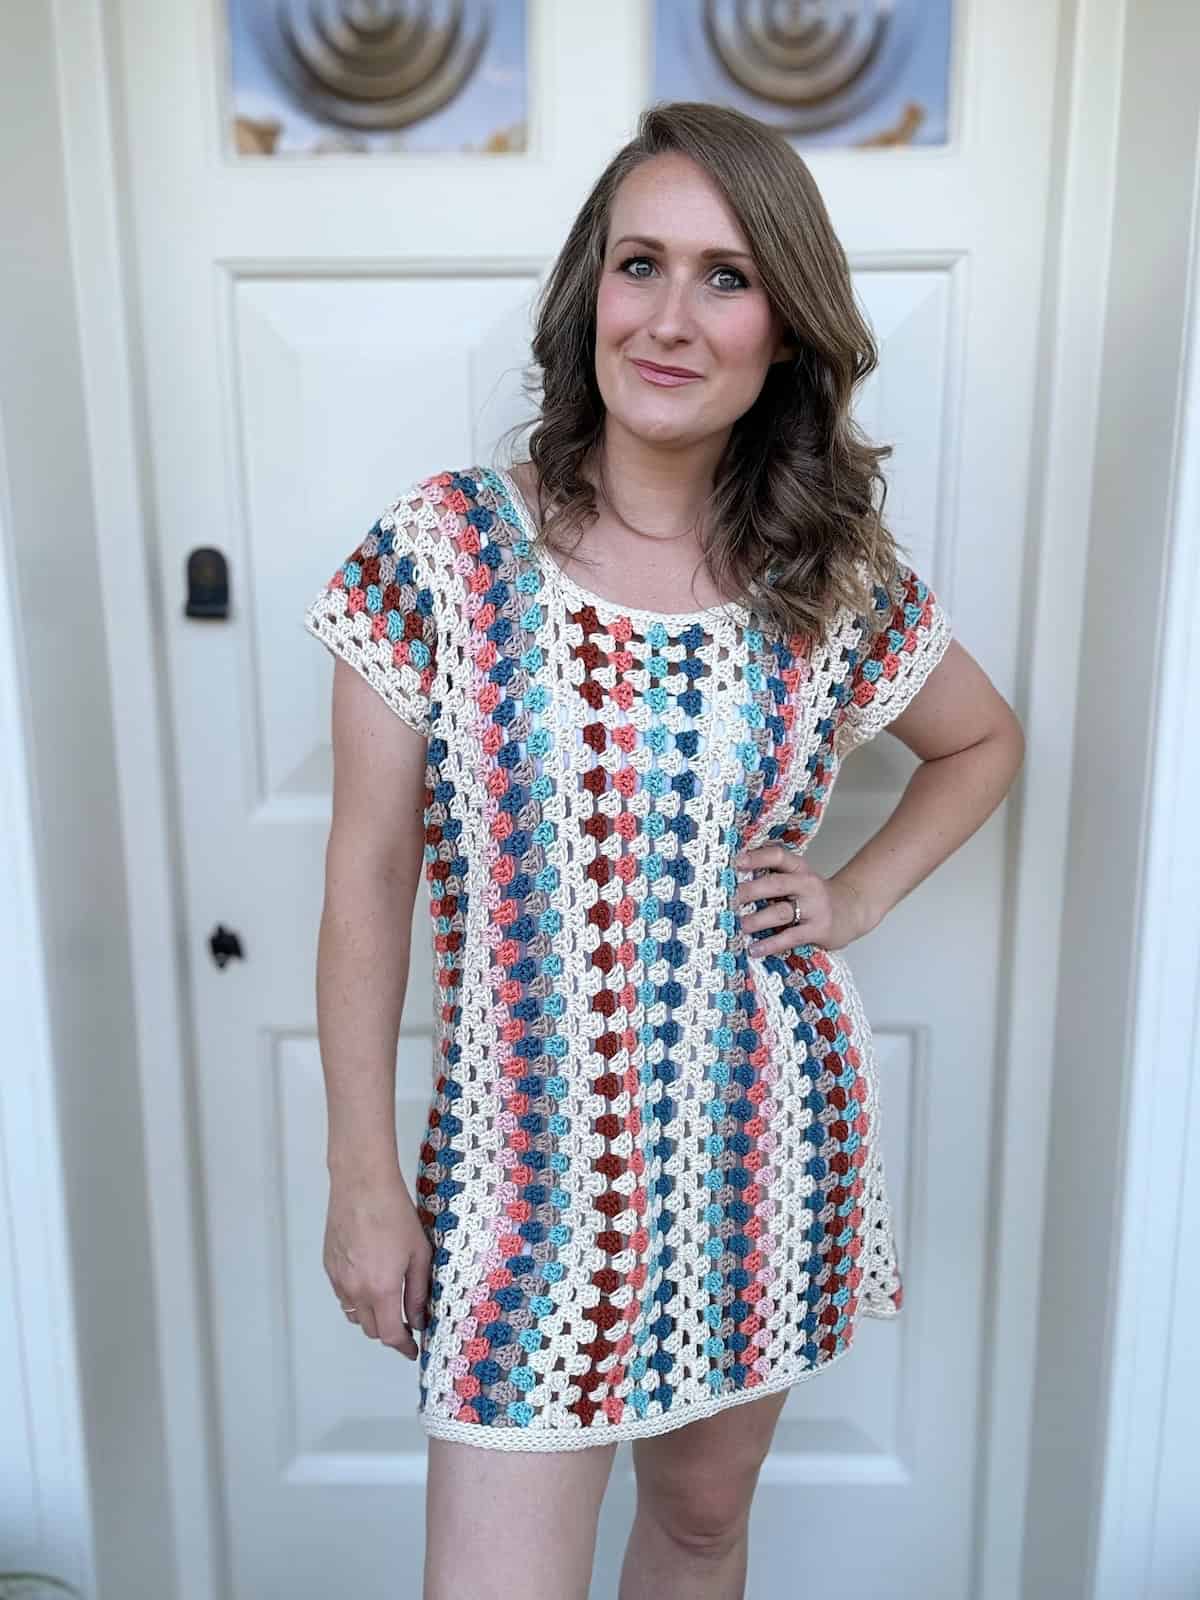 A person stands in front of a white door, wearing a multicolored crochet dress, with one hand on their hip, looking at the camera.